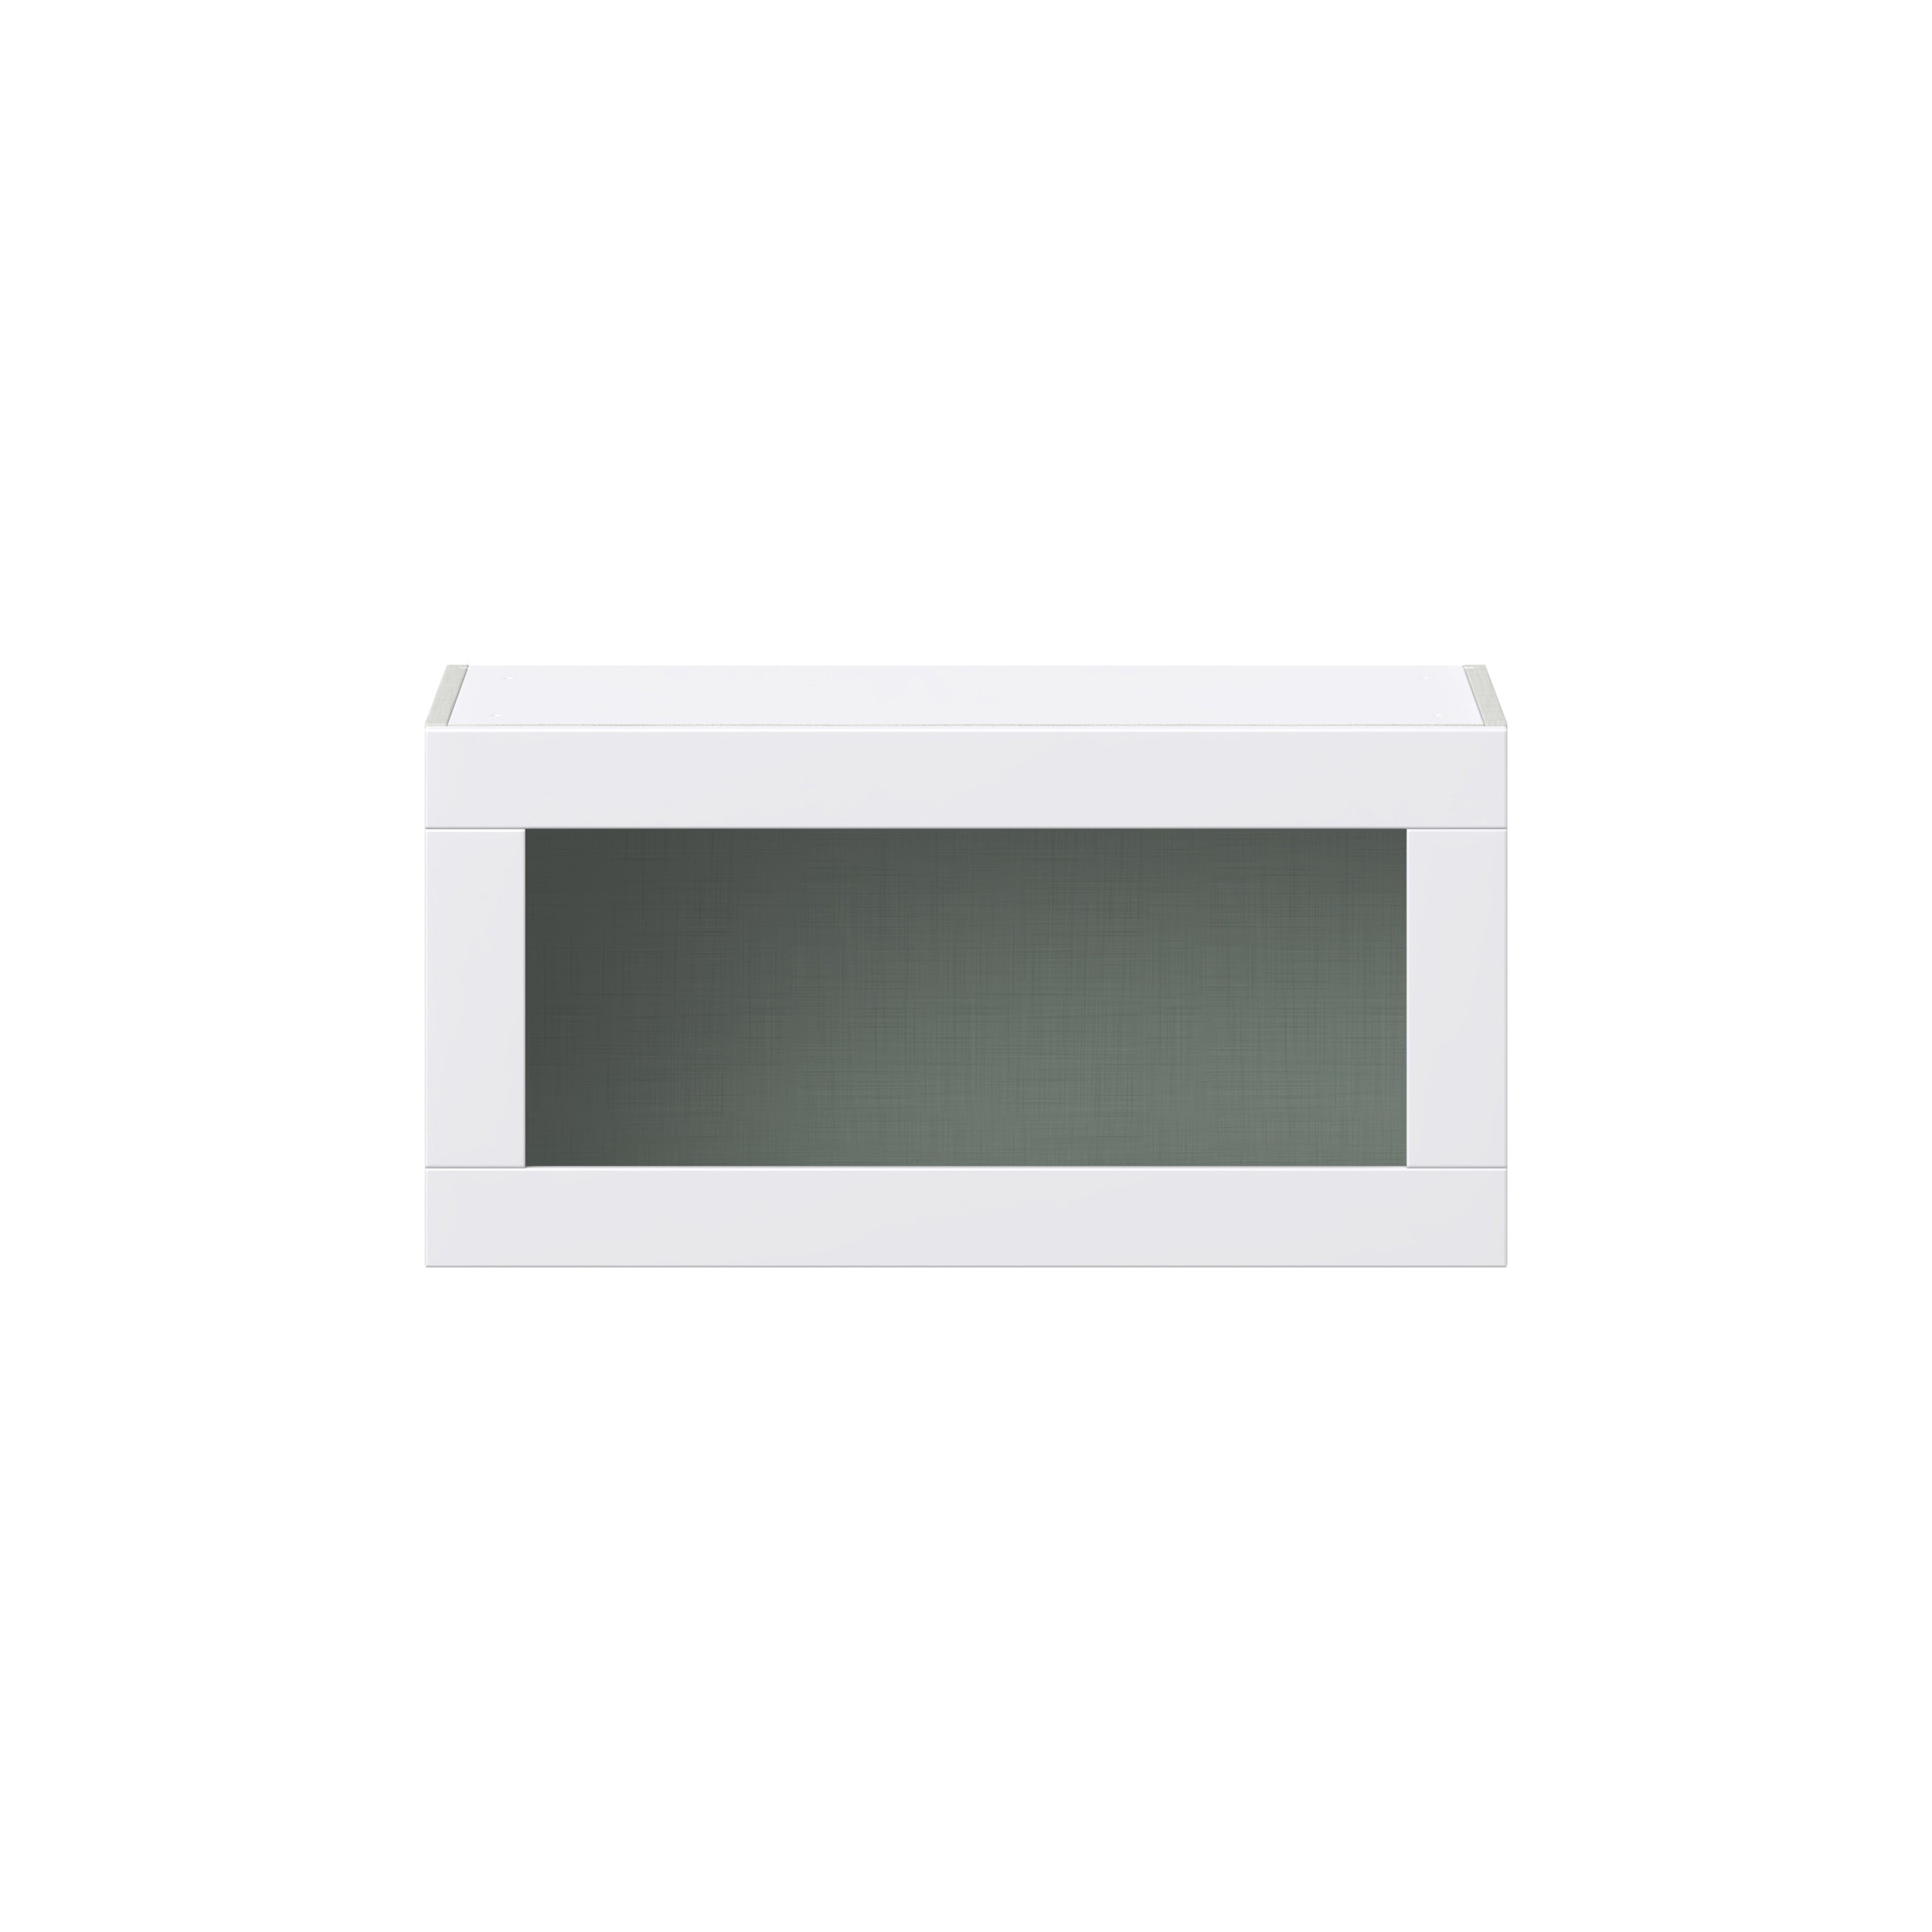 Bright White Assembled Wall Bridge  Cabinet with Lift Up Glass Door (30 in. W x 15 in. H x 14 in. D)